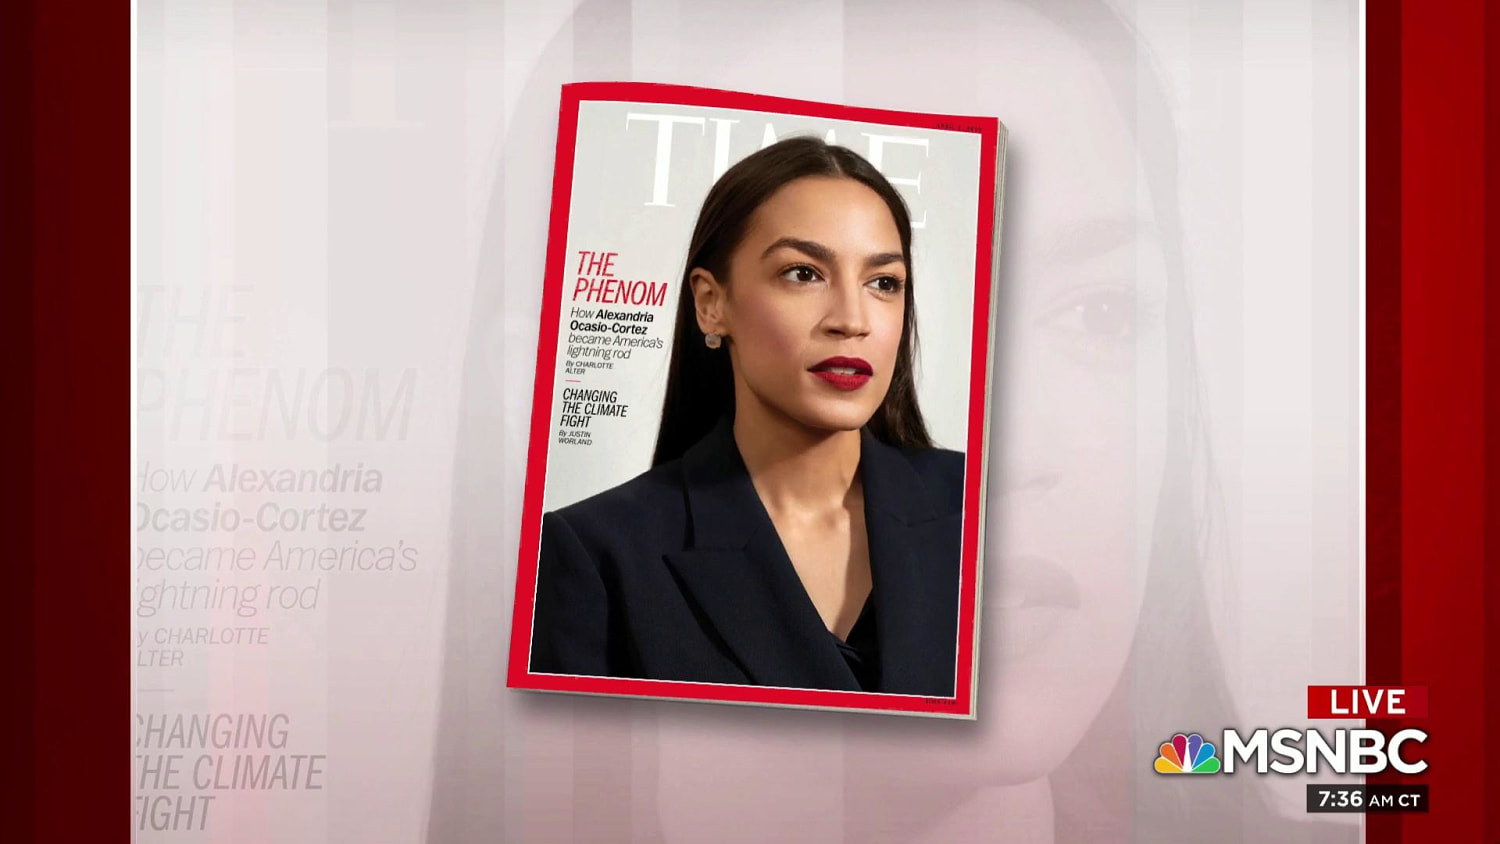 Alexandria Ocasio-Cortez Is on the Cover of Time Magazine